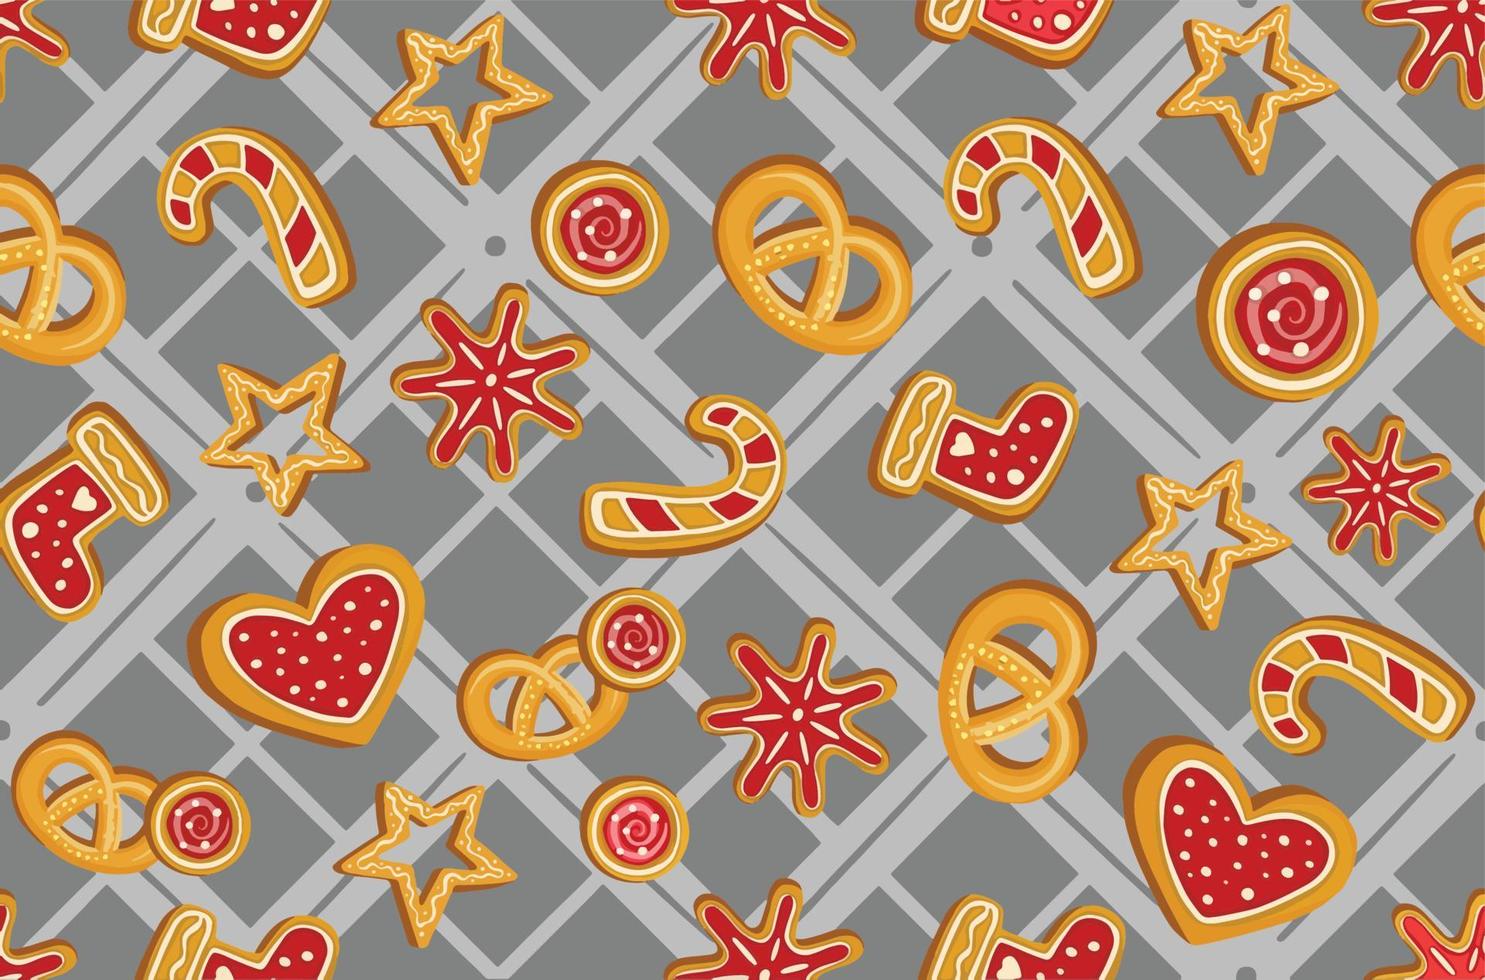 Winter seamless patterns with gingerbread cookies. Awesome holiday background. Christmas repeating texture for surface design, wallpapers, fabrics, wrapping paper etc. vector